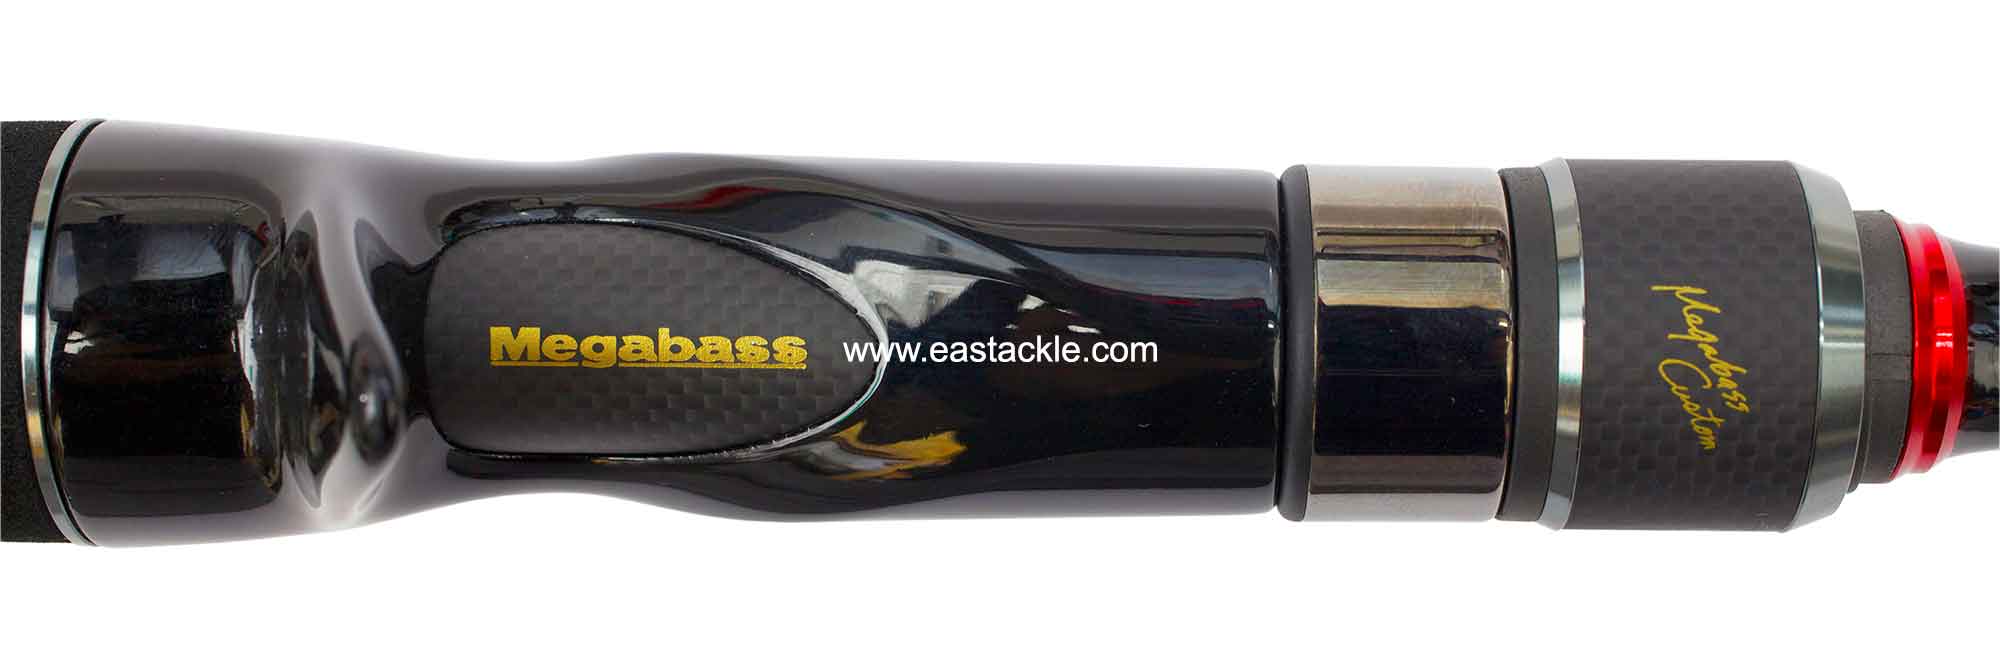 Megabass - Racing Condition World Edition - RCC-662M - Bait Casting Rod - Reel Seat Section (Bottom View)